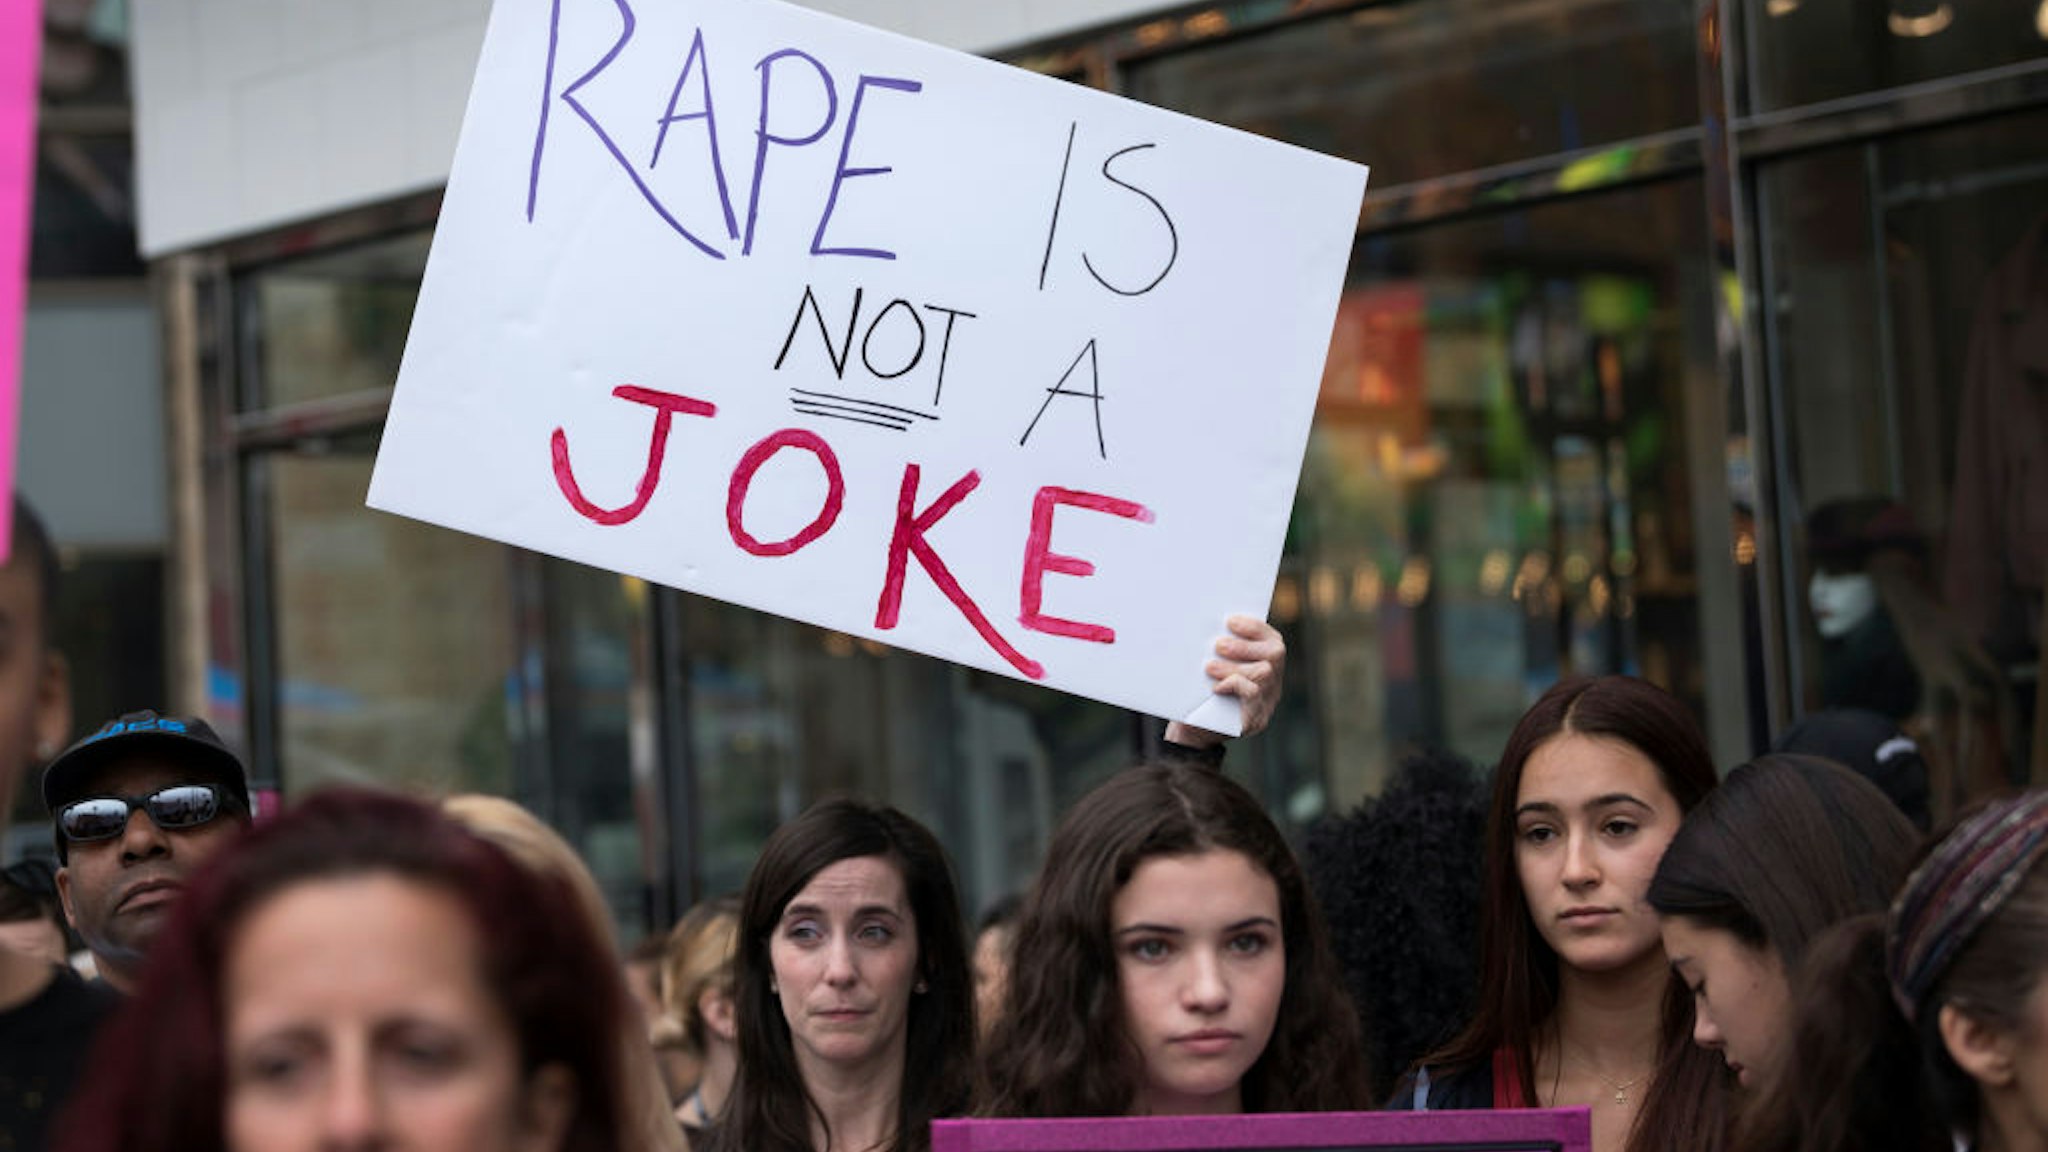 Protesters attend a Me Too rally to denounce sexual harassment and assaults of women in Los Angeles, California on November 12, 2017